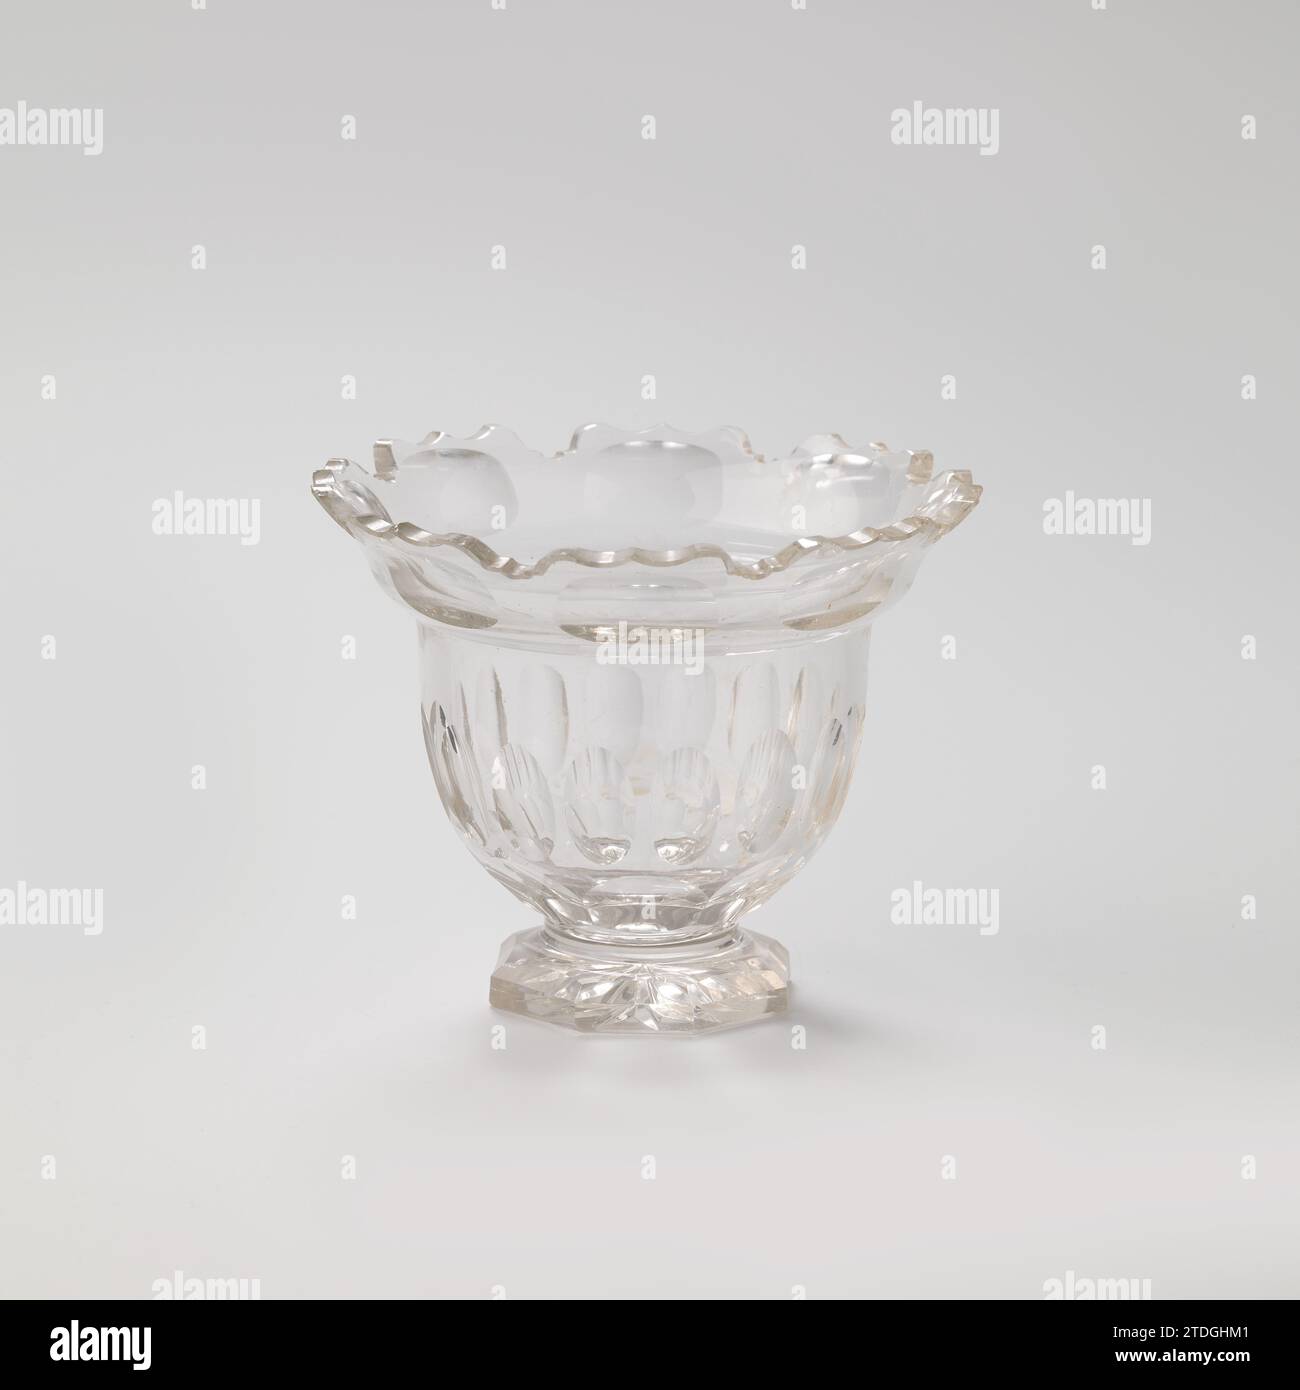 Sugar bowl of cut crystal on octagonal base, anonymous, c. 1881 Round sugar bowl of sharpened crystal. The pot rests on an octagonal base. The ball -walled barrel has a sloping scalloped top edge. With lid (BK-1981-12-B-2). Netherlands (possibly) crystal (lead glass) Round sugar bowl of sharpened crystal. The pot rests on an octagonal base. The ball -walled barrel has a sloping scalloped top edge. With lid (BK-1981-12-B-2). Netherlands (possibly) crystal (lead glass) Stock Photo